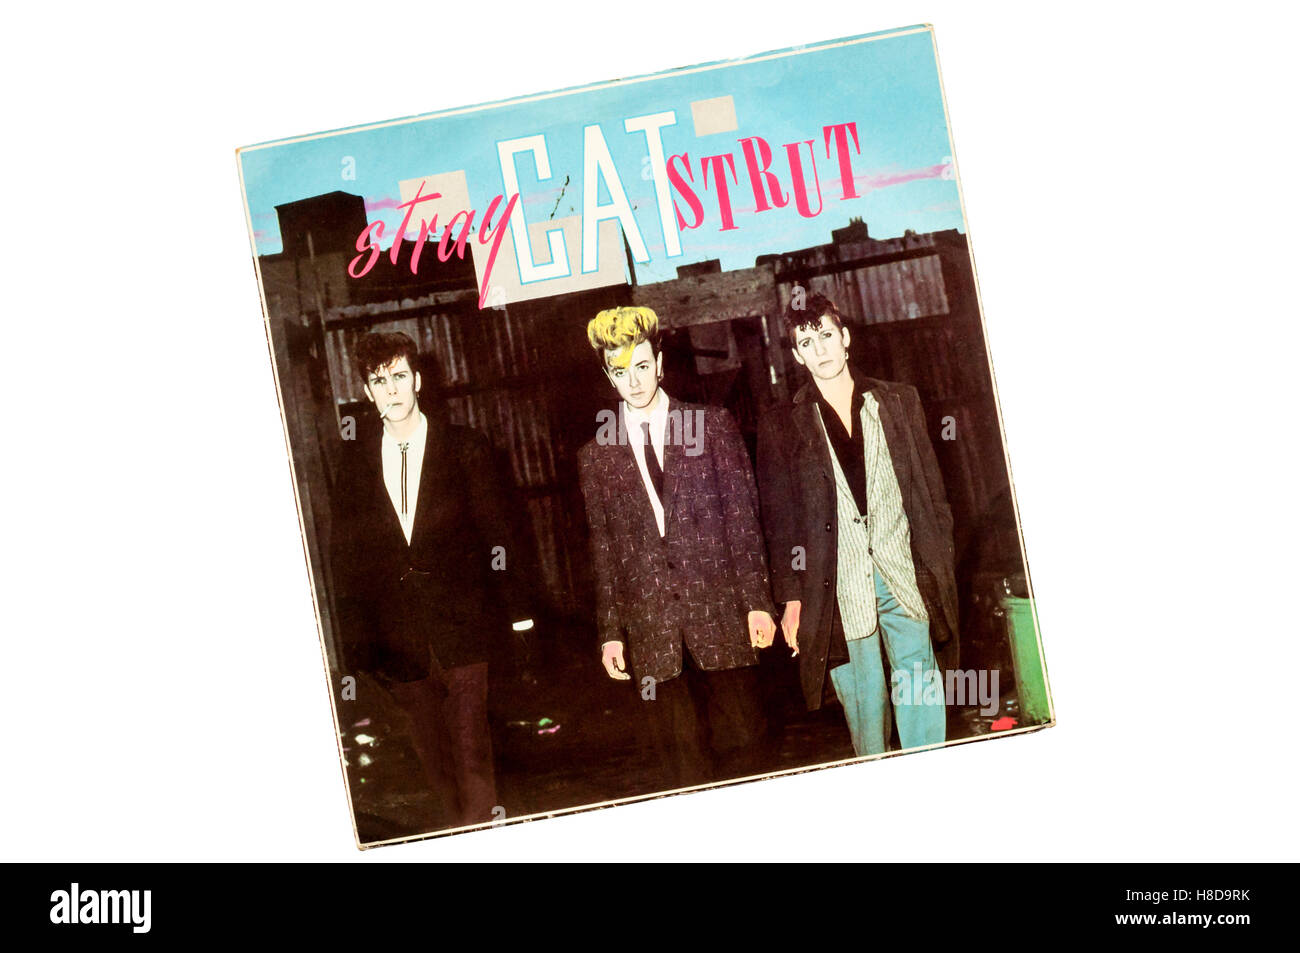 The single Stray Cat Strut by Stray Cats released in 1981 from their eponymous debut album. Stock Photo